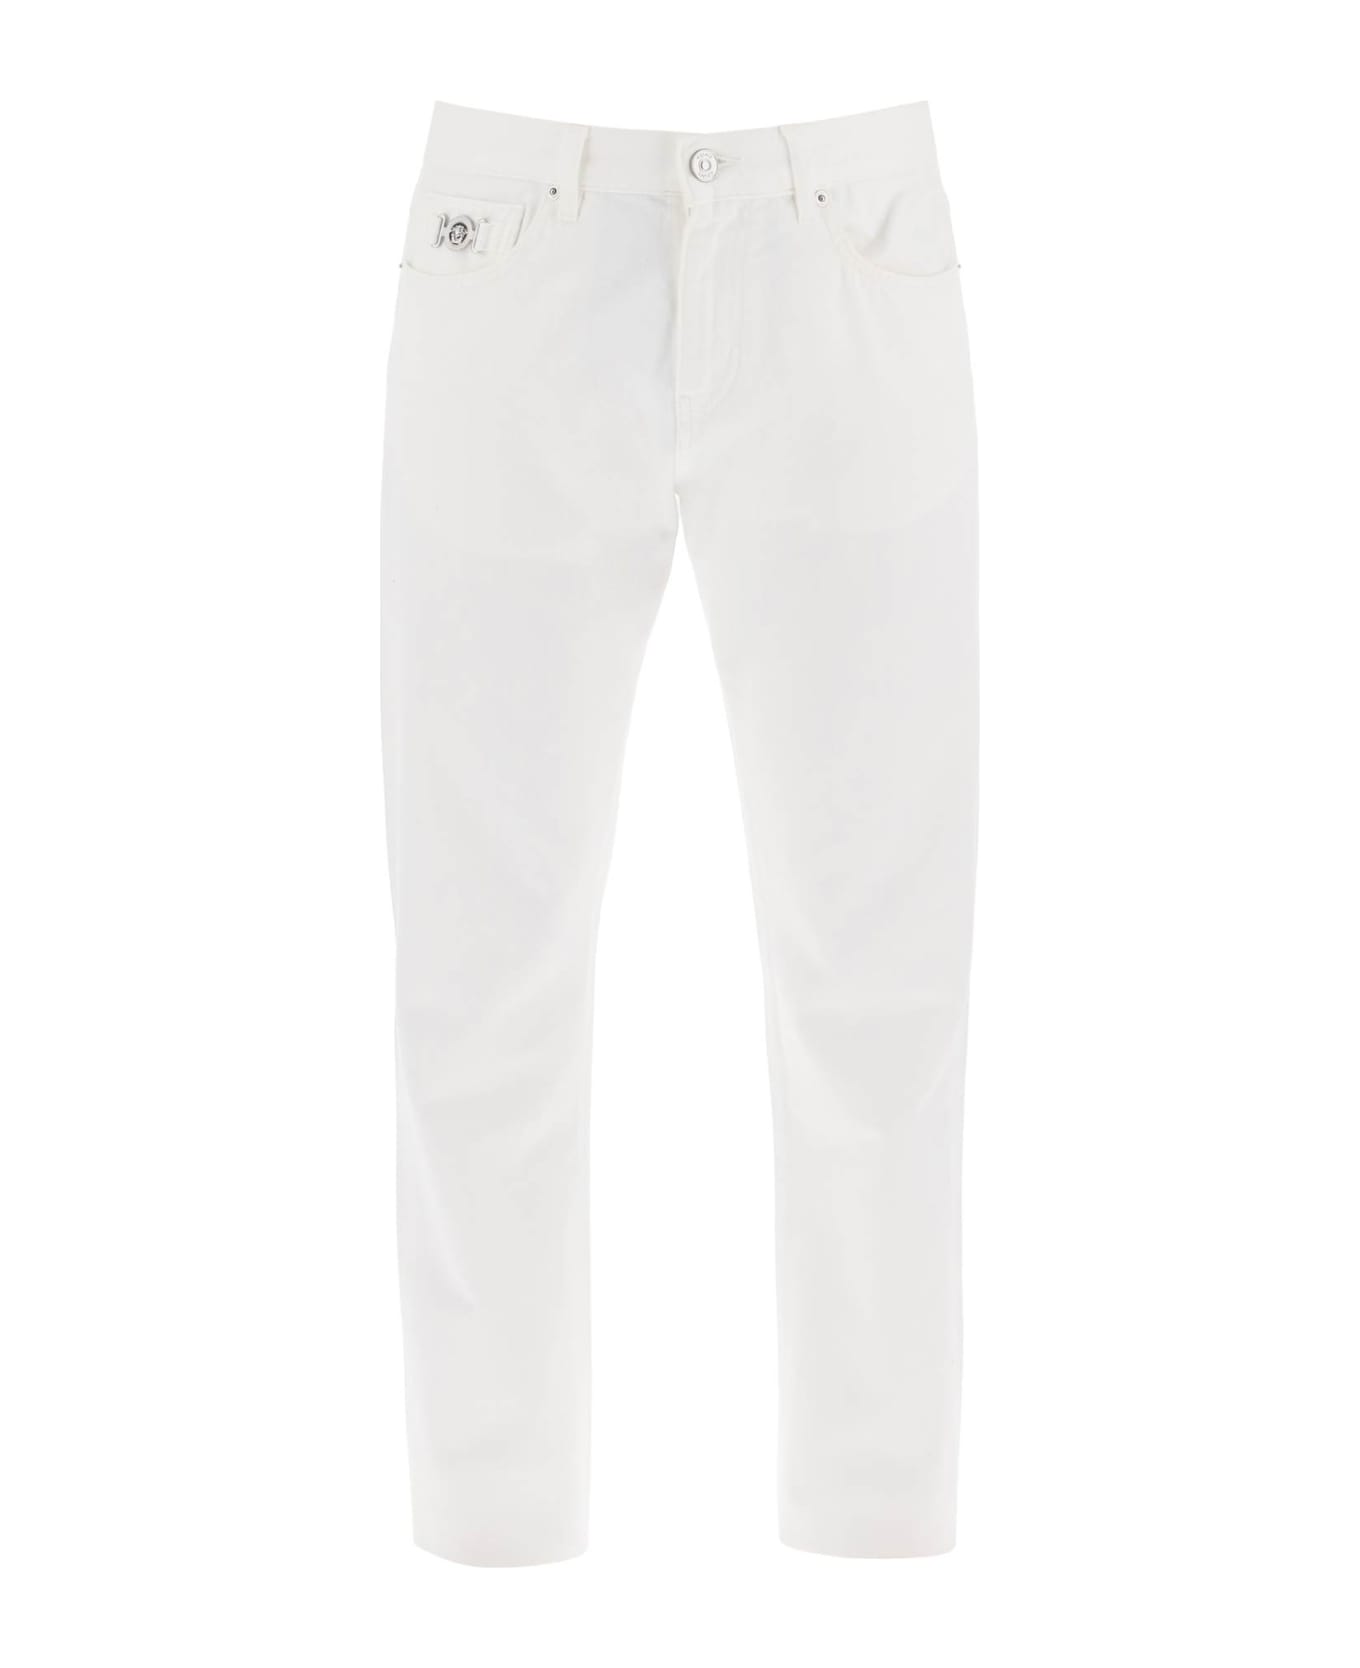 Versace Jeans Regular Fit - White